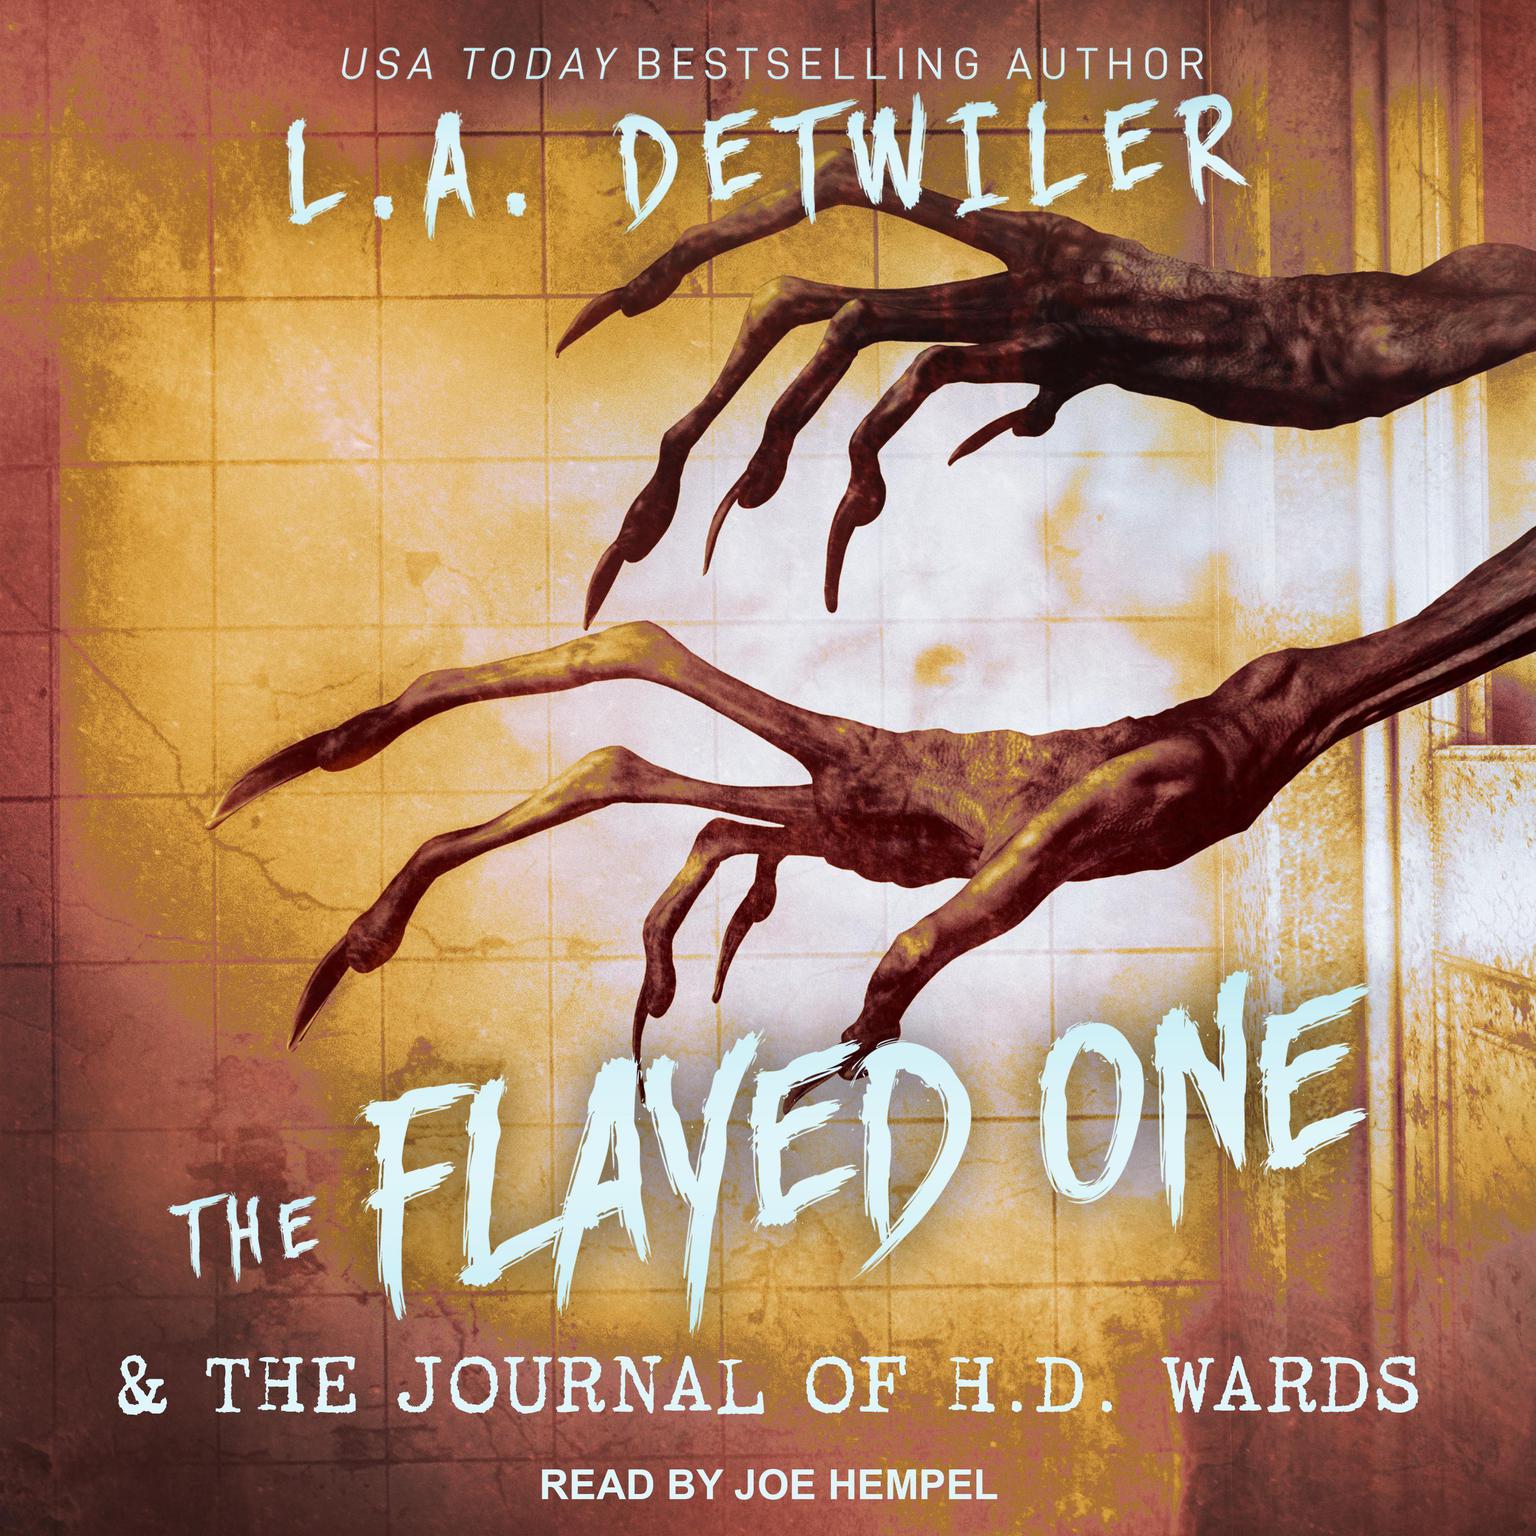 The Flayed One & The Journal of H.D. Wards Audiobook, by L.A. Detwiler